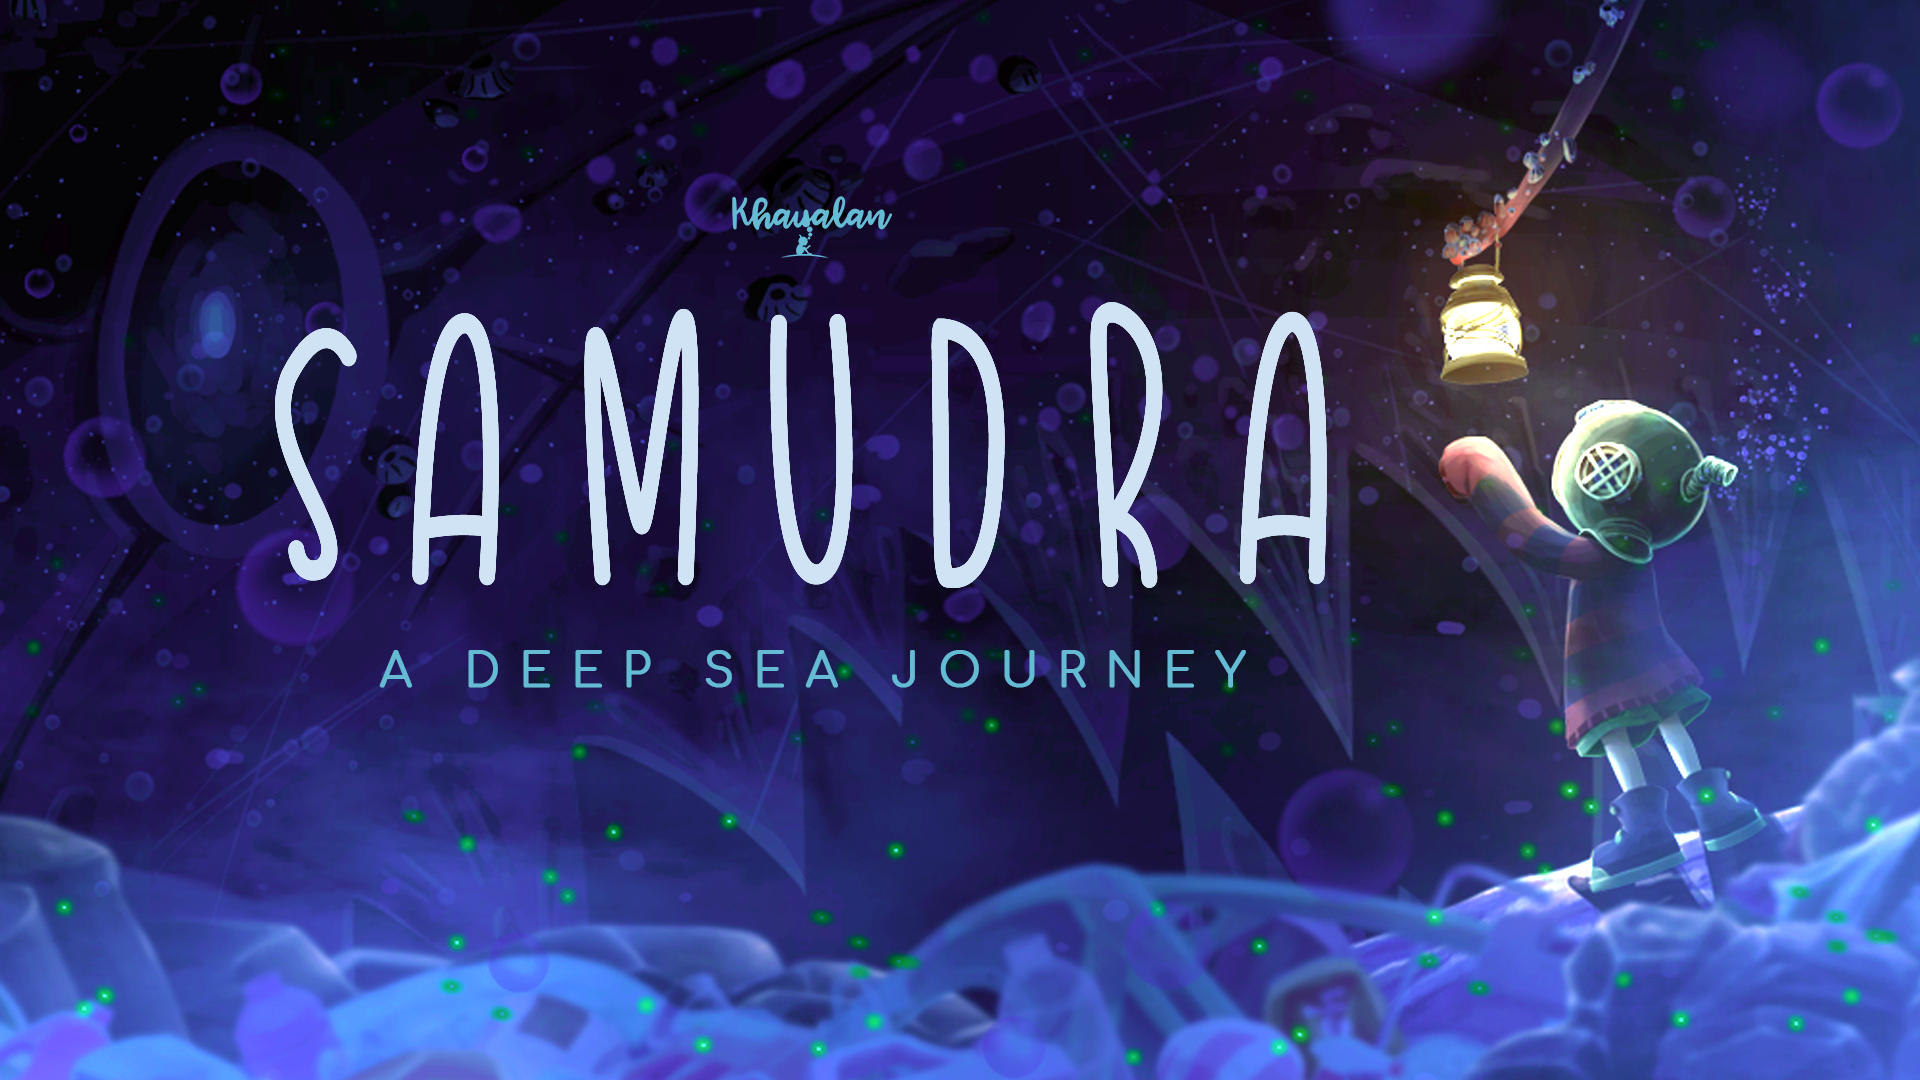 Dark blue underwater scene with a person in a deep-sea diving helmet reaching up to a lantern, with the words "Samudra, A deep sea journey" overlaid.